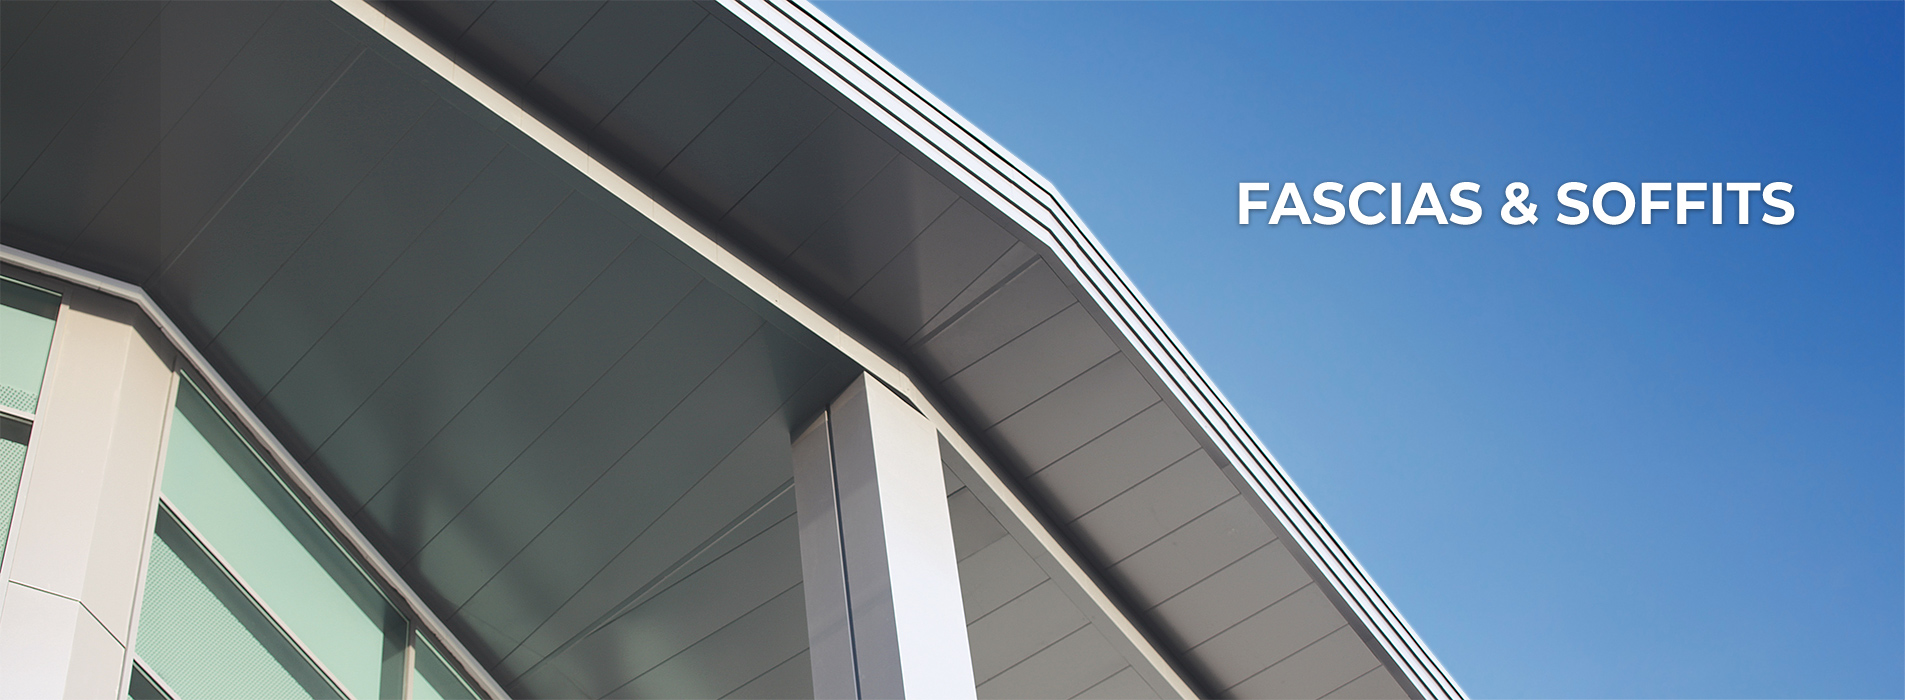 Fascias and Soffits Hammersmith Academy